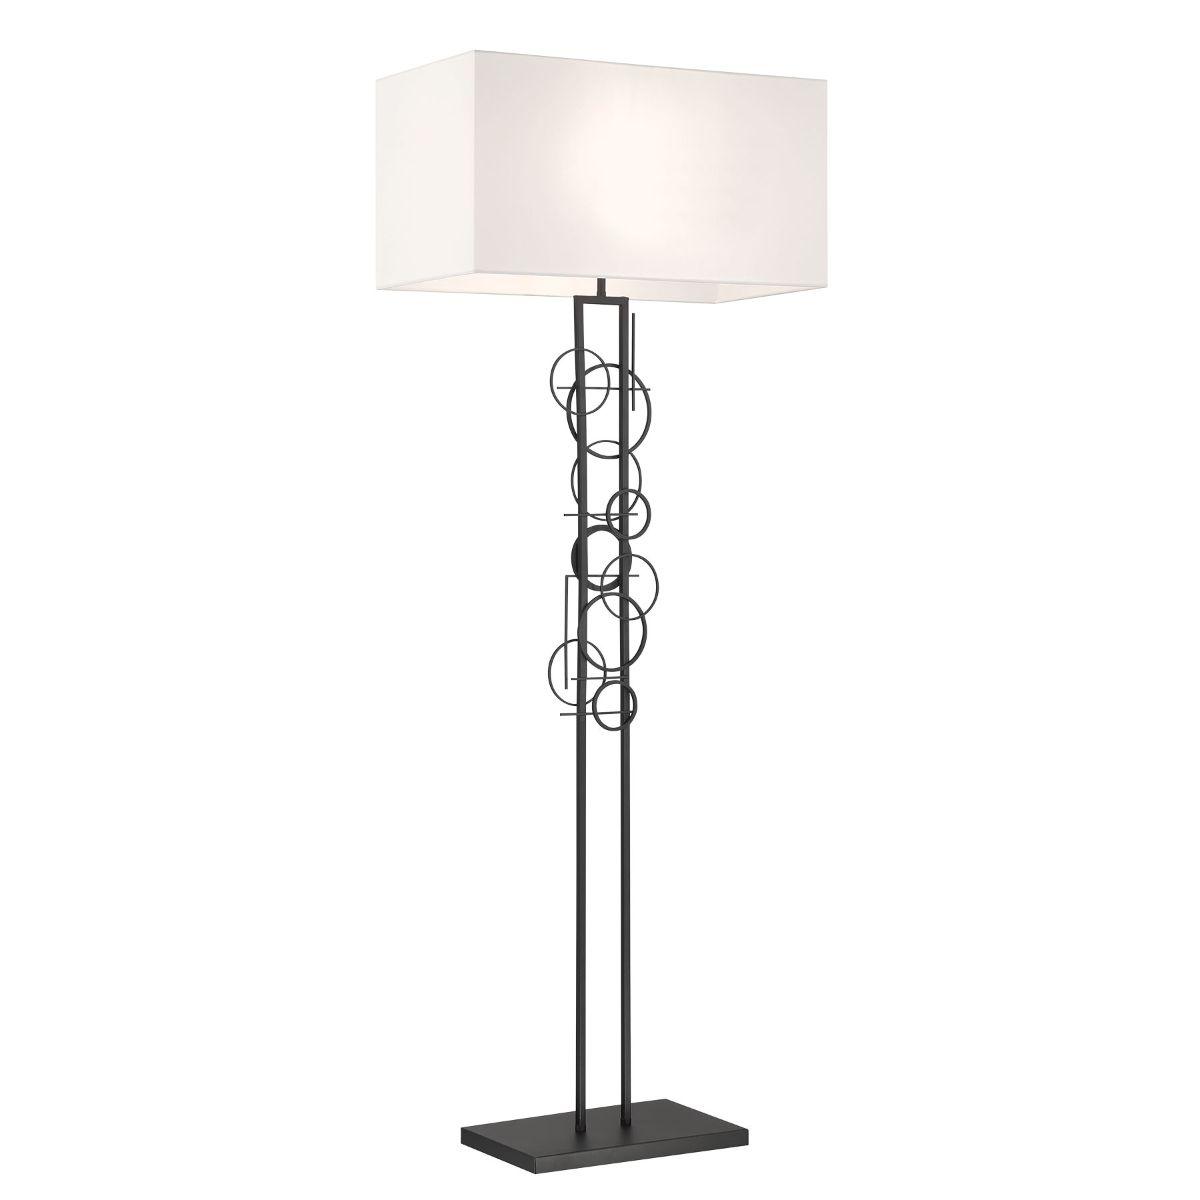 Tempo 2 Lights Floor Lamp in Steel with a Sand Coal Finish